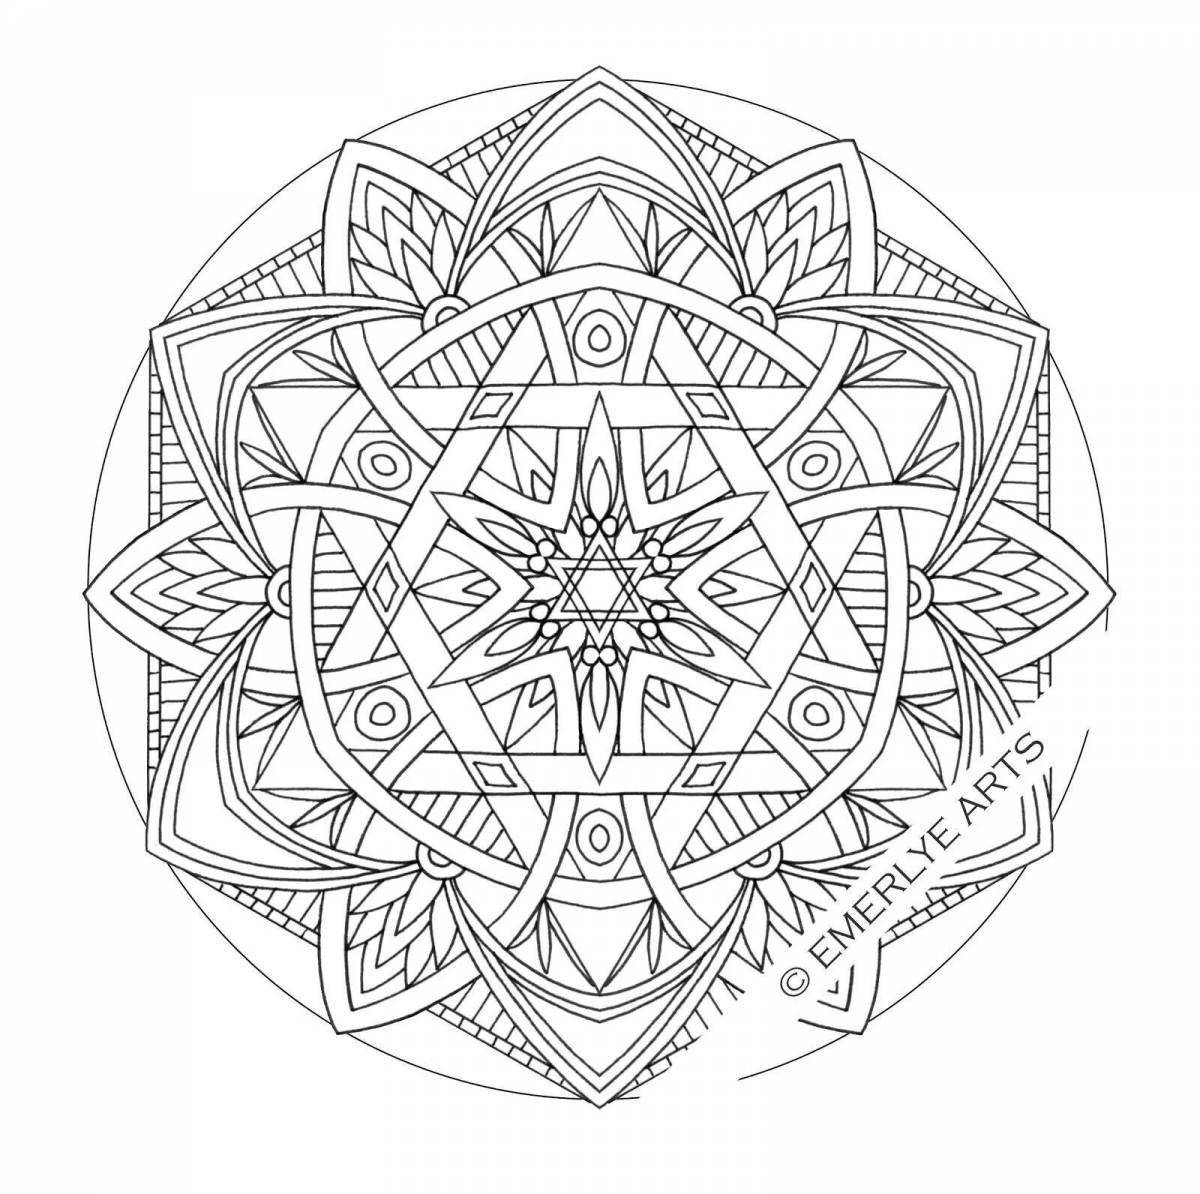 Inspirational mantra coloring pages